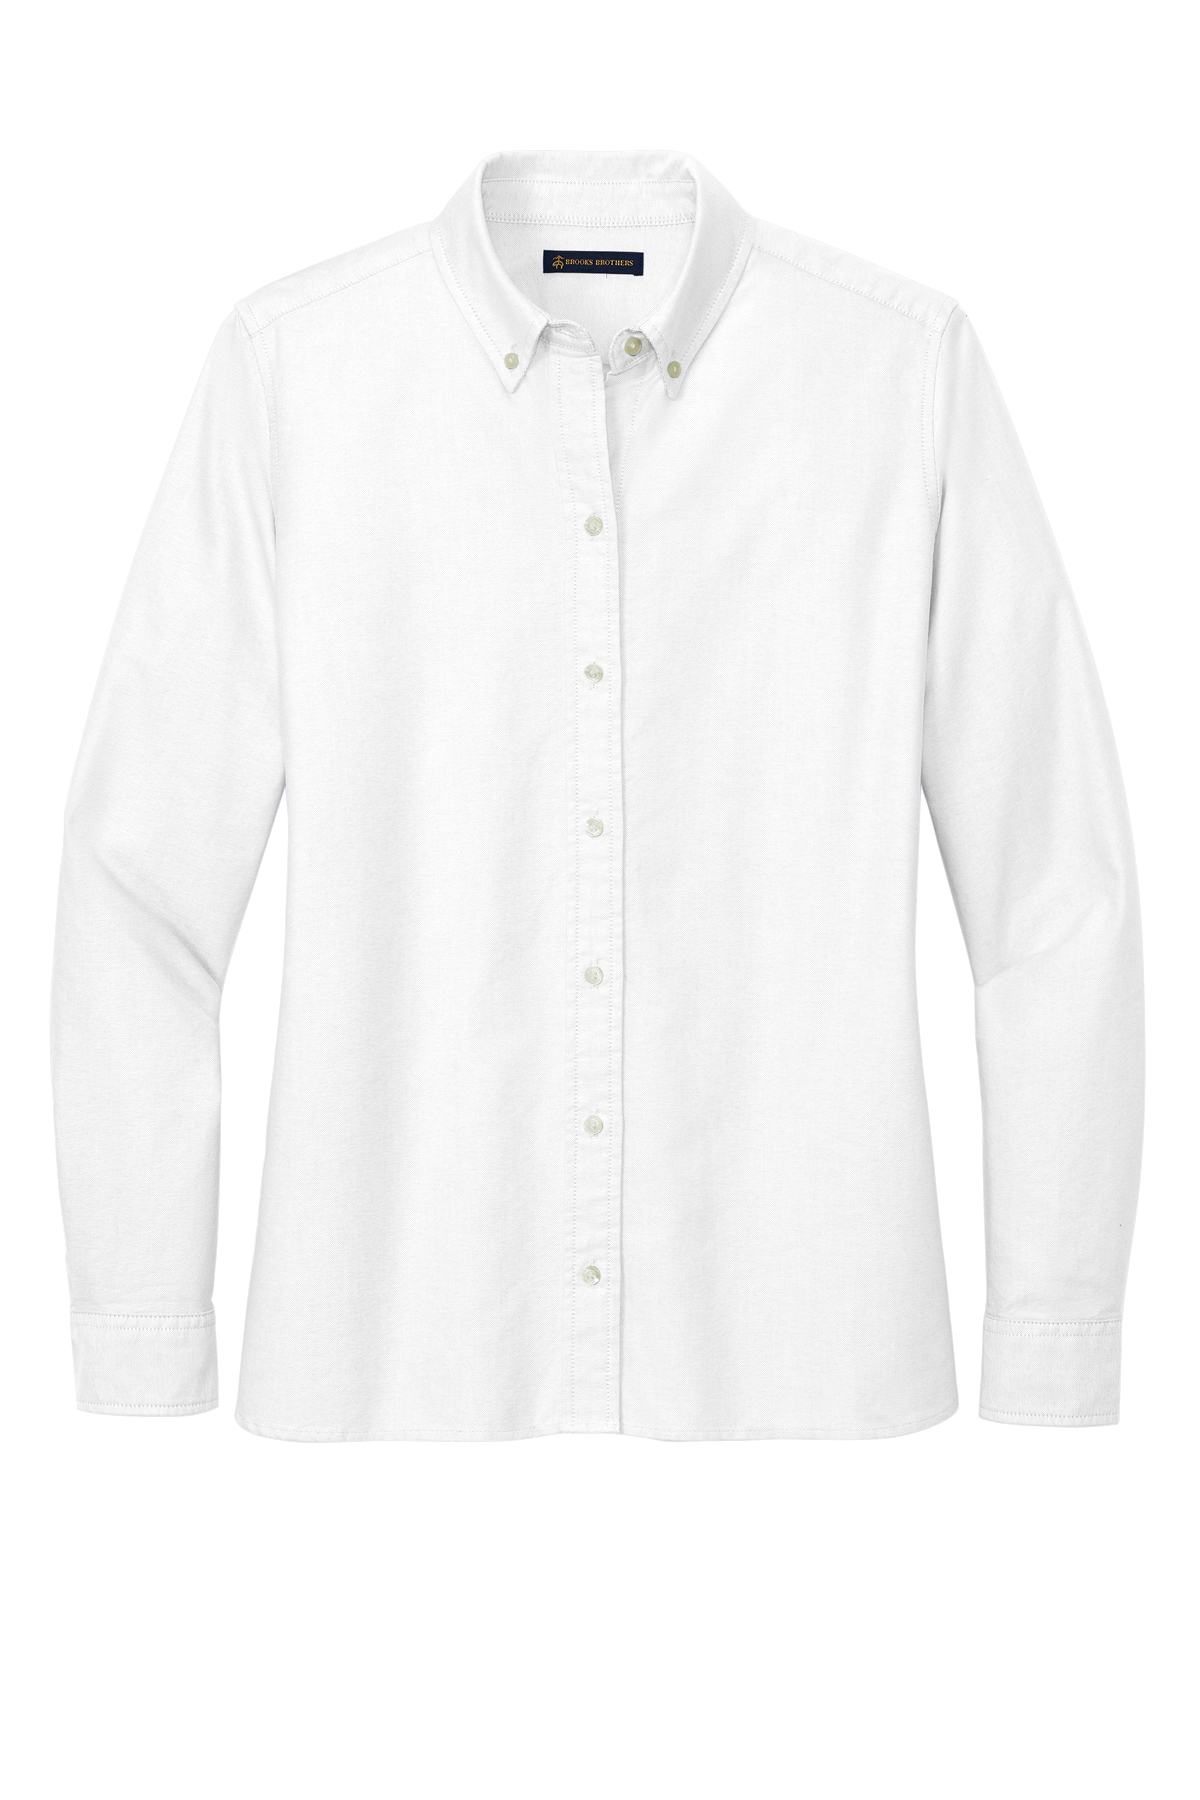 Brooks Brothers Women’s Casual Oxford Cloth Shirt | Product | SanMar